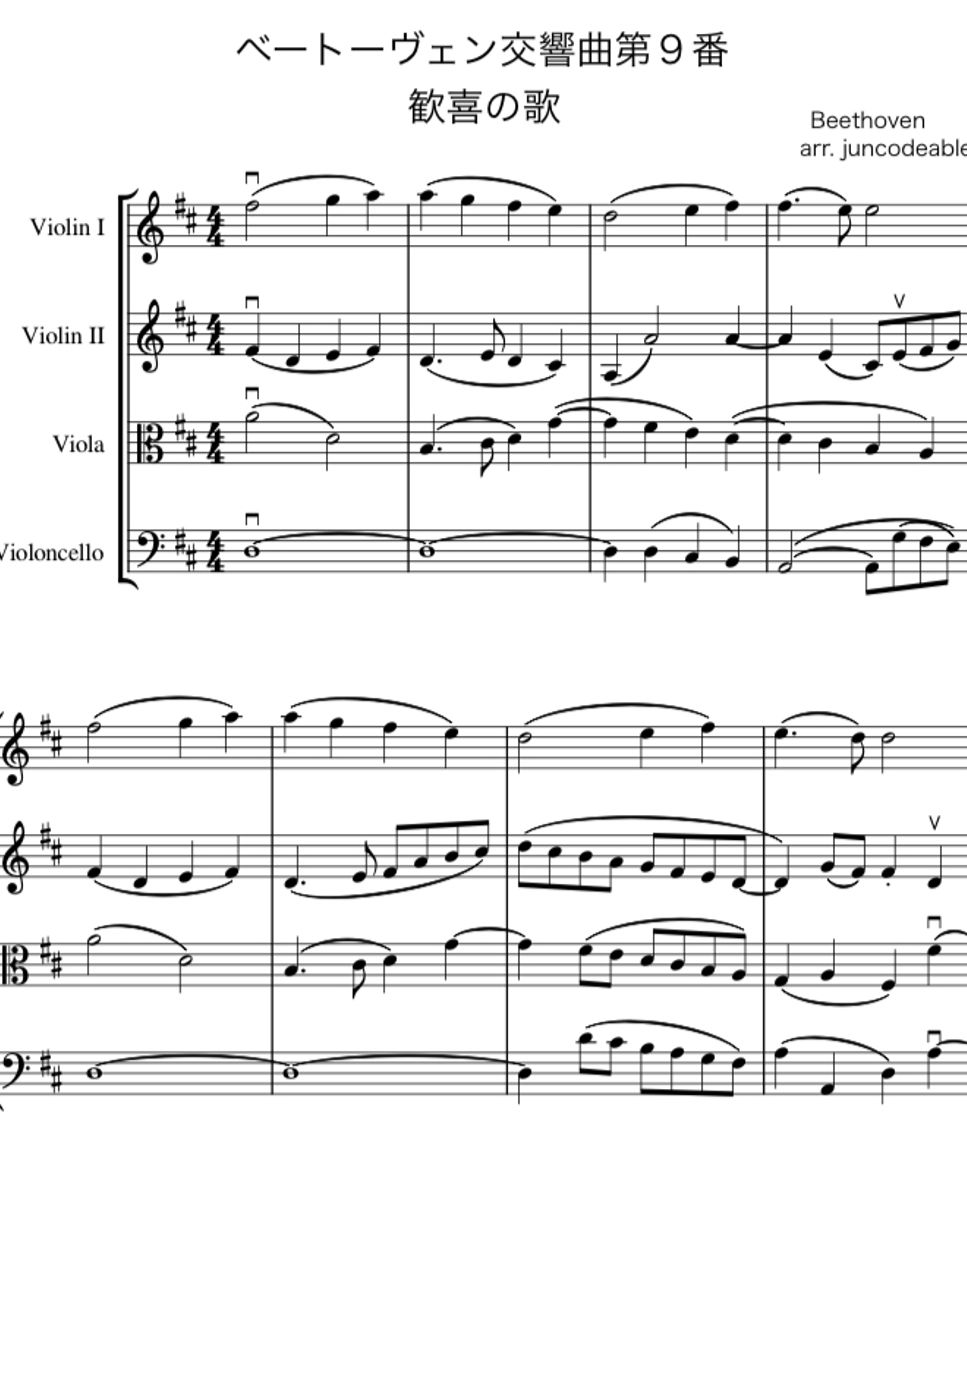 Beethoven - Beethoven symphony no.9『Ode to joy』 (string quartet) by arr. juncodeable